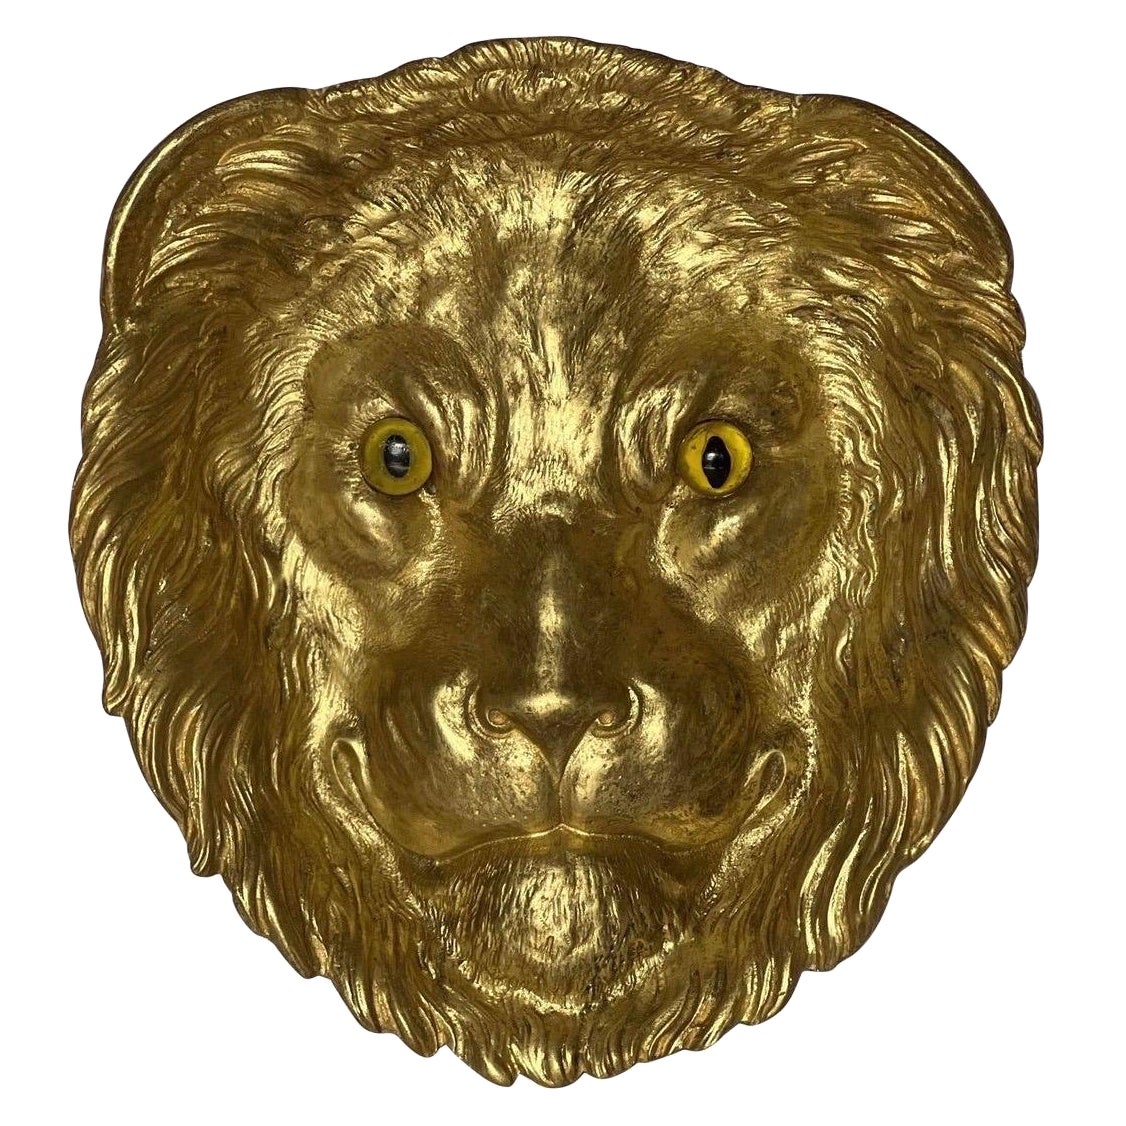 Antique French Gilt Bronze Lion Head Form Ashtray / Catchall with Glass Eyes